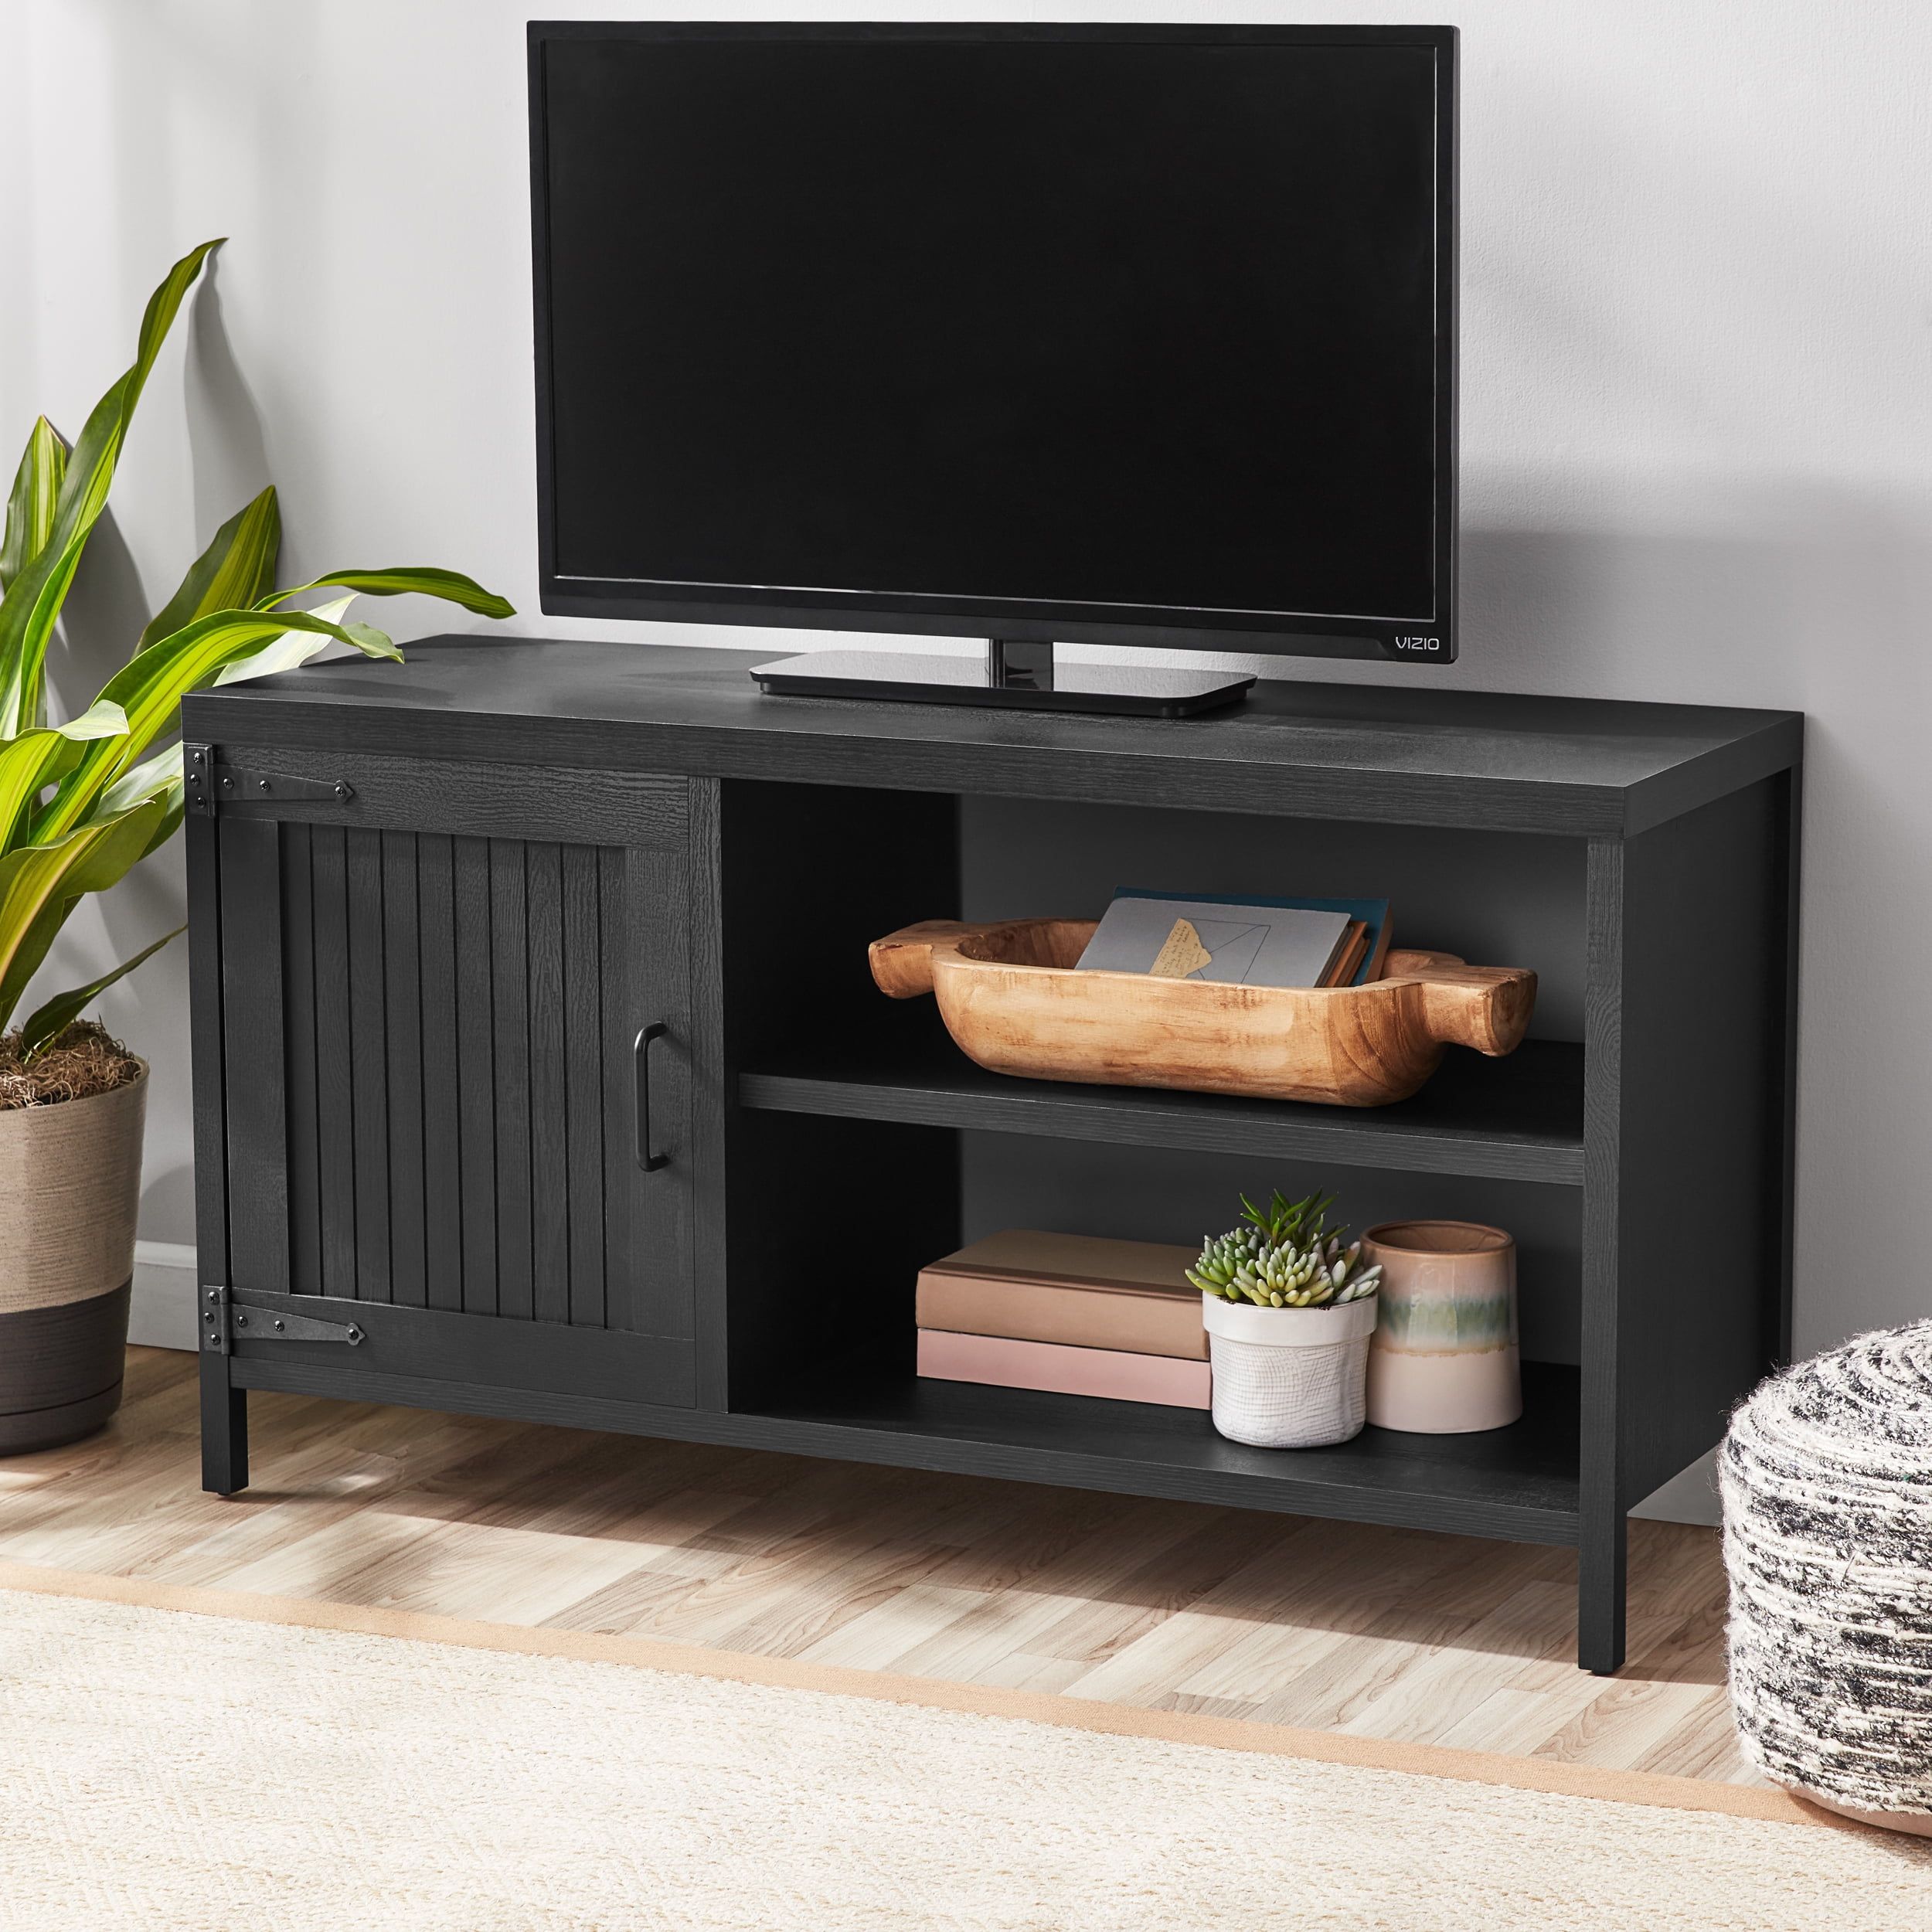 Mainstays Farmhouse Tv Stand For Tvs Up To 50", Black – Walmart Pertaining To Farmhouse Stands For Tvs (Photo 10 of 15)